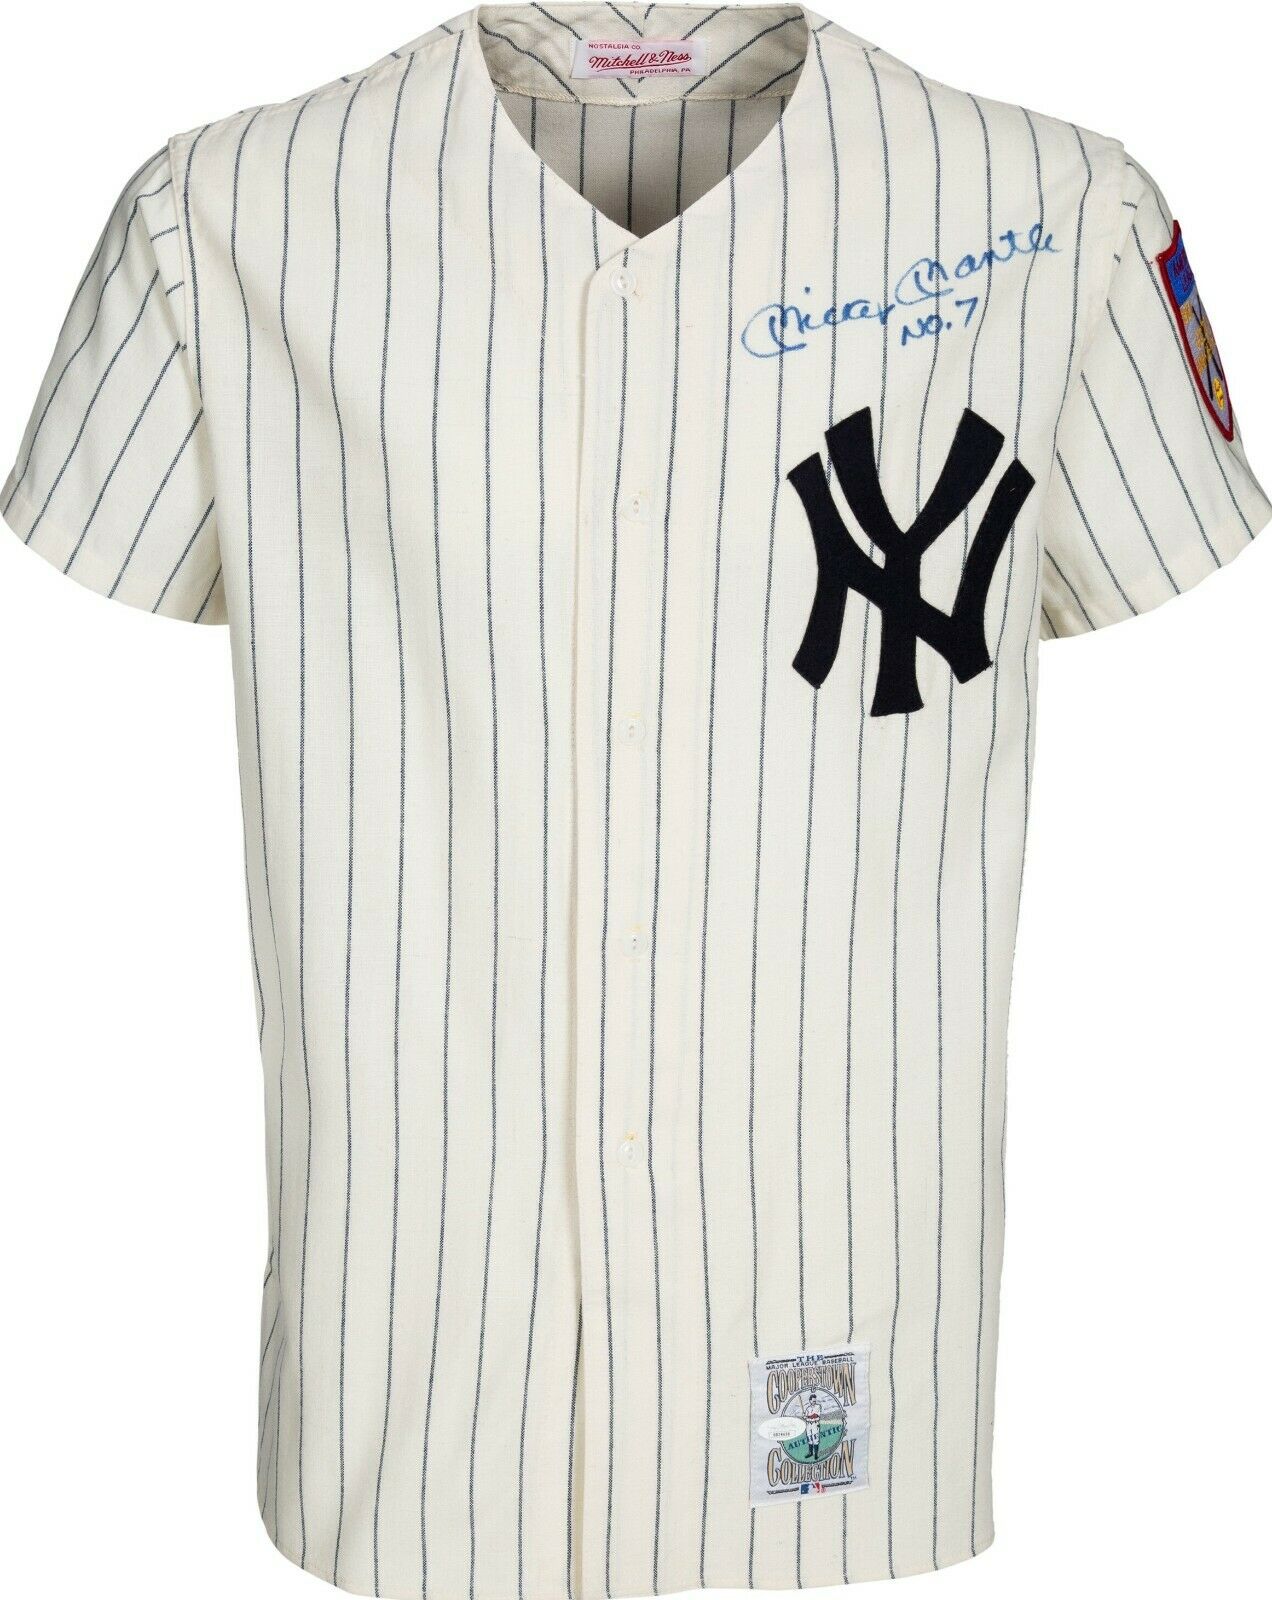 MICKEY MANTLE MITCHELL & NESS 1951 ROOKIE NEW YORK YANKEES